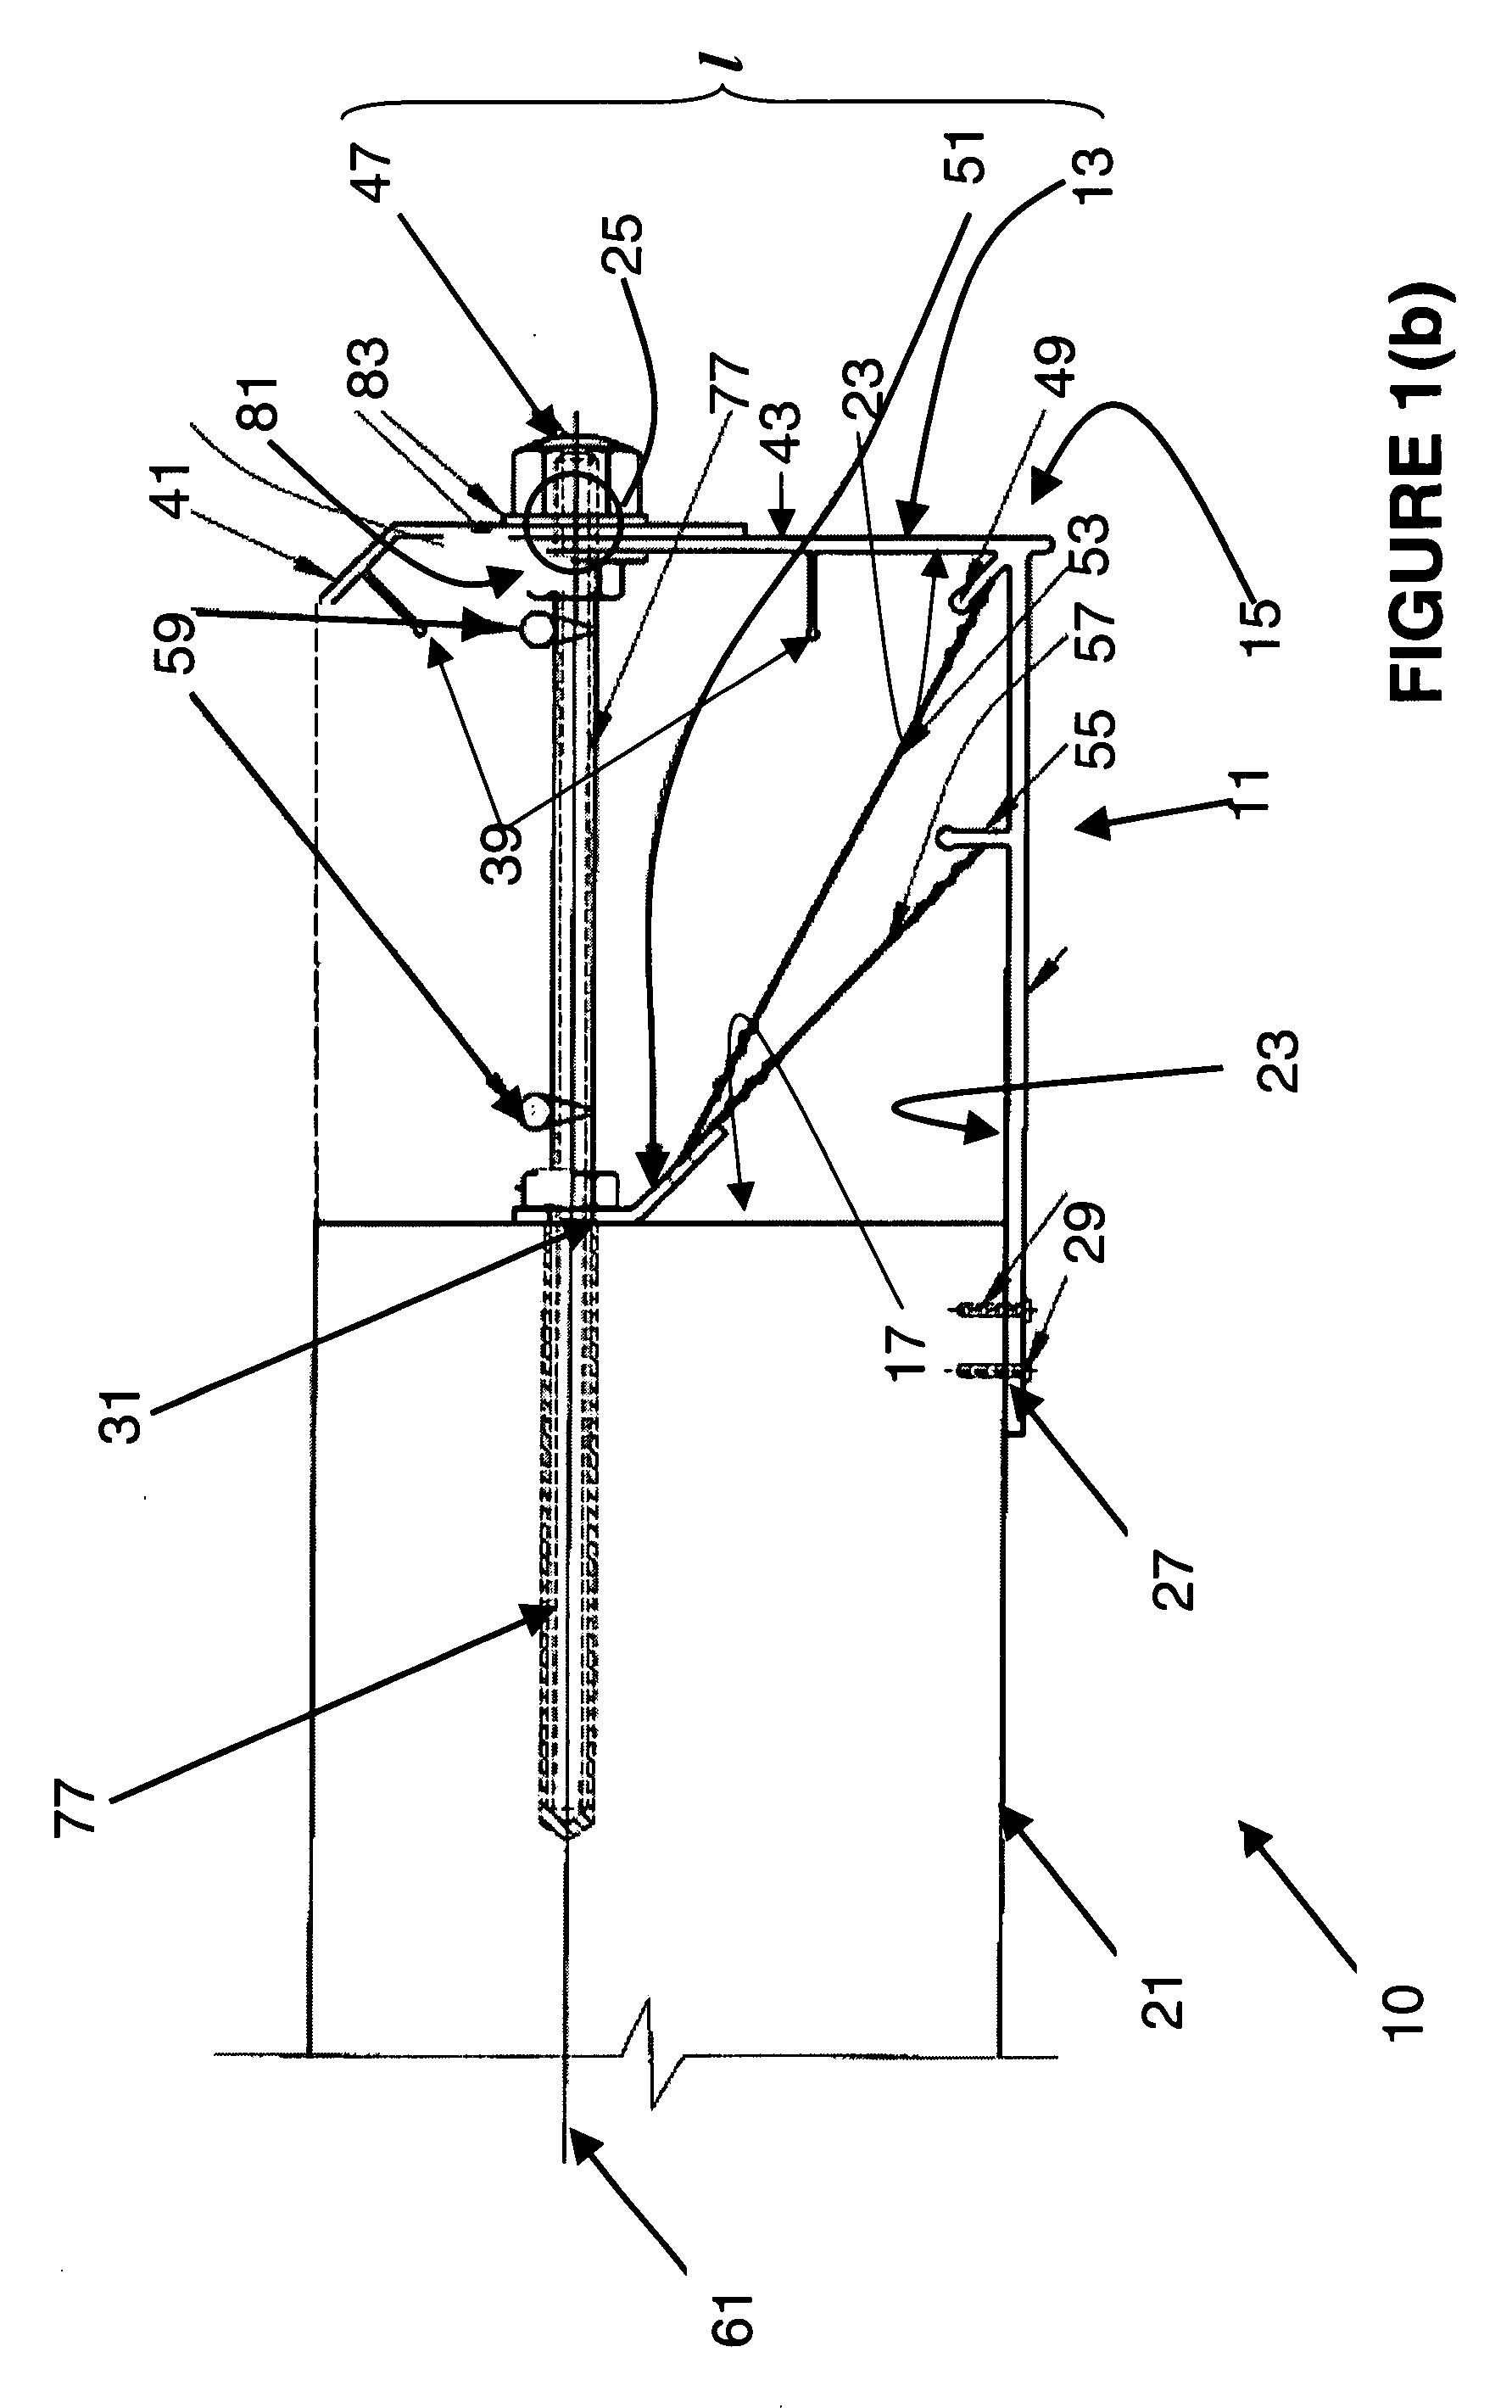 Slab edge casing and method therefor